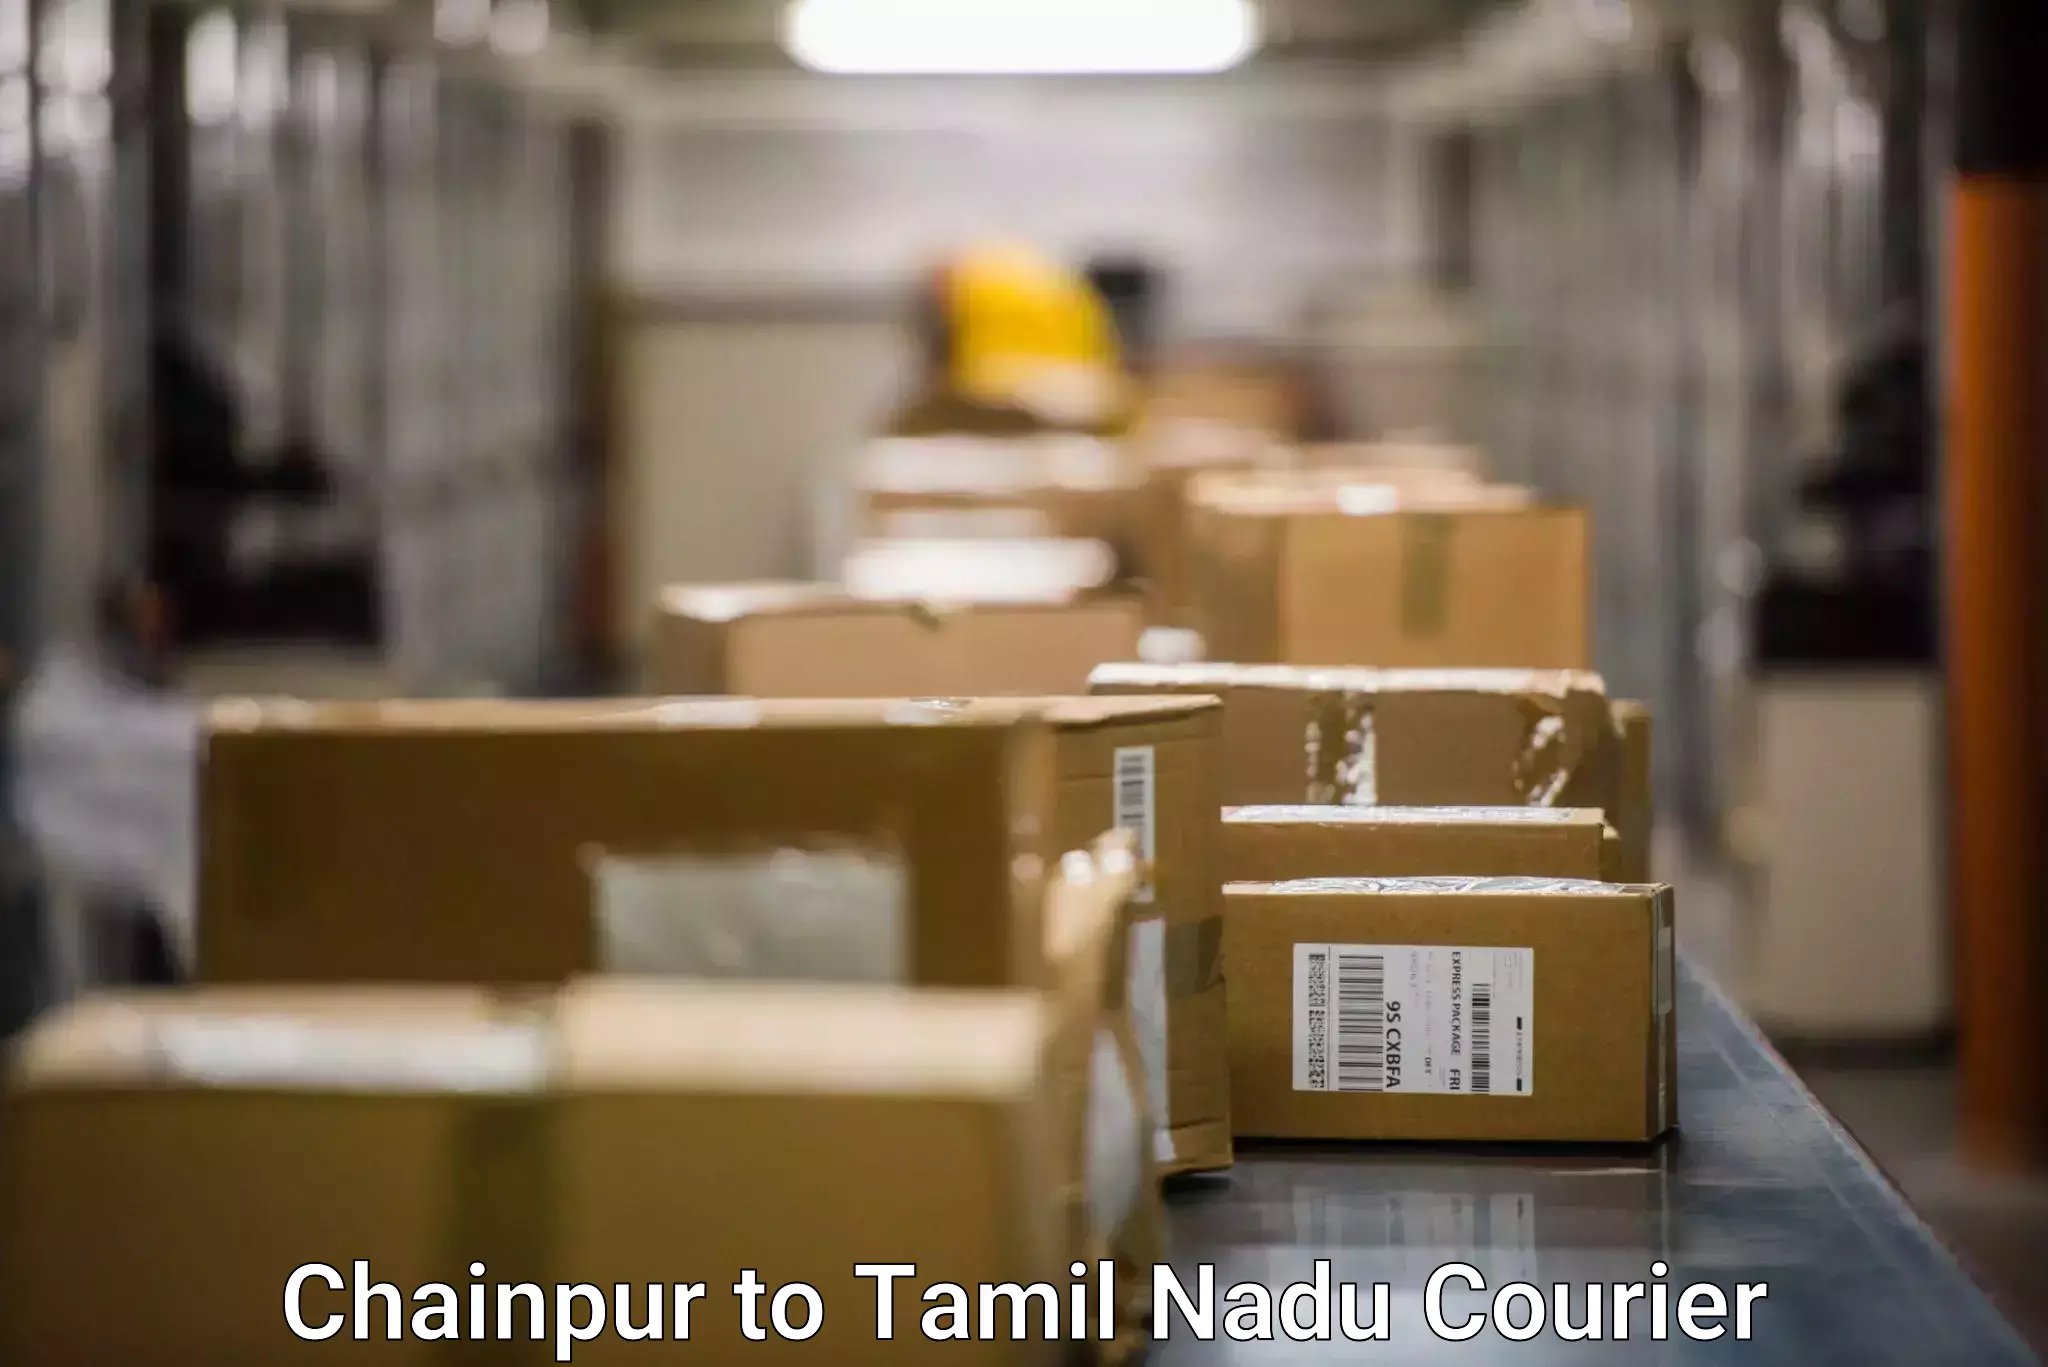 Easy access courier services Chainpur to Chennai Port